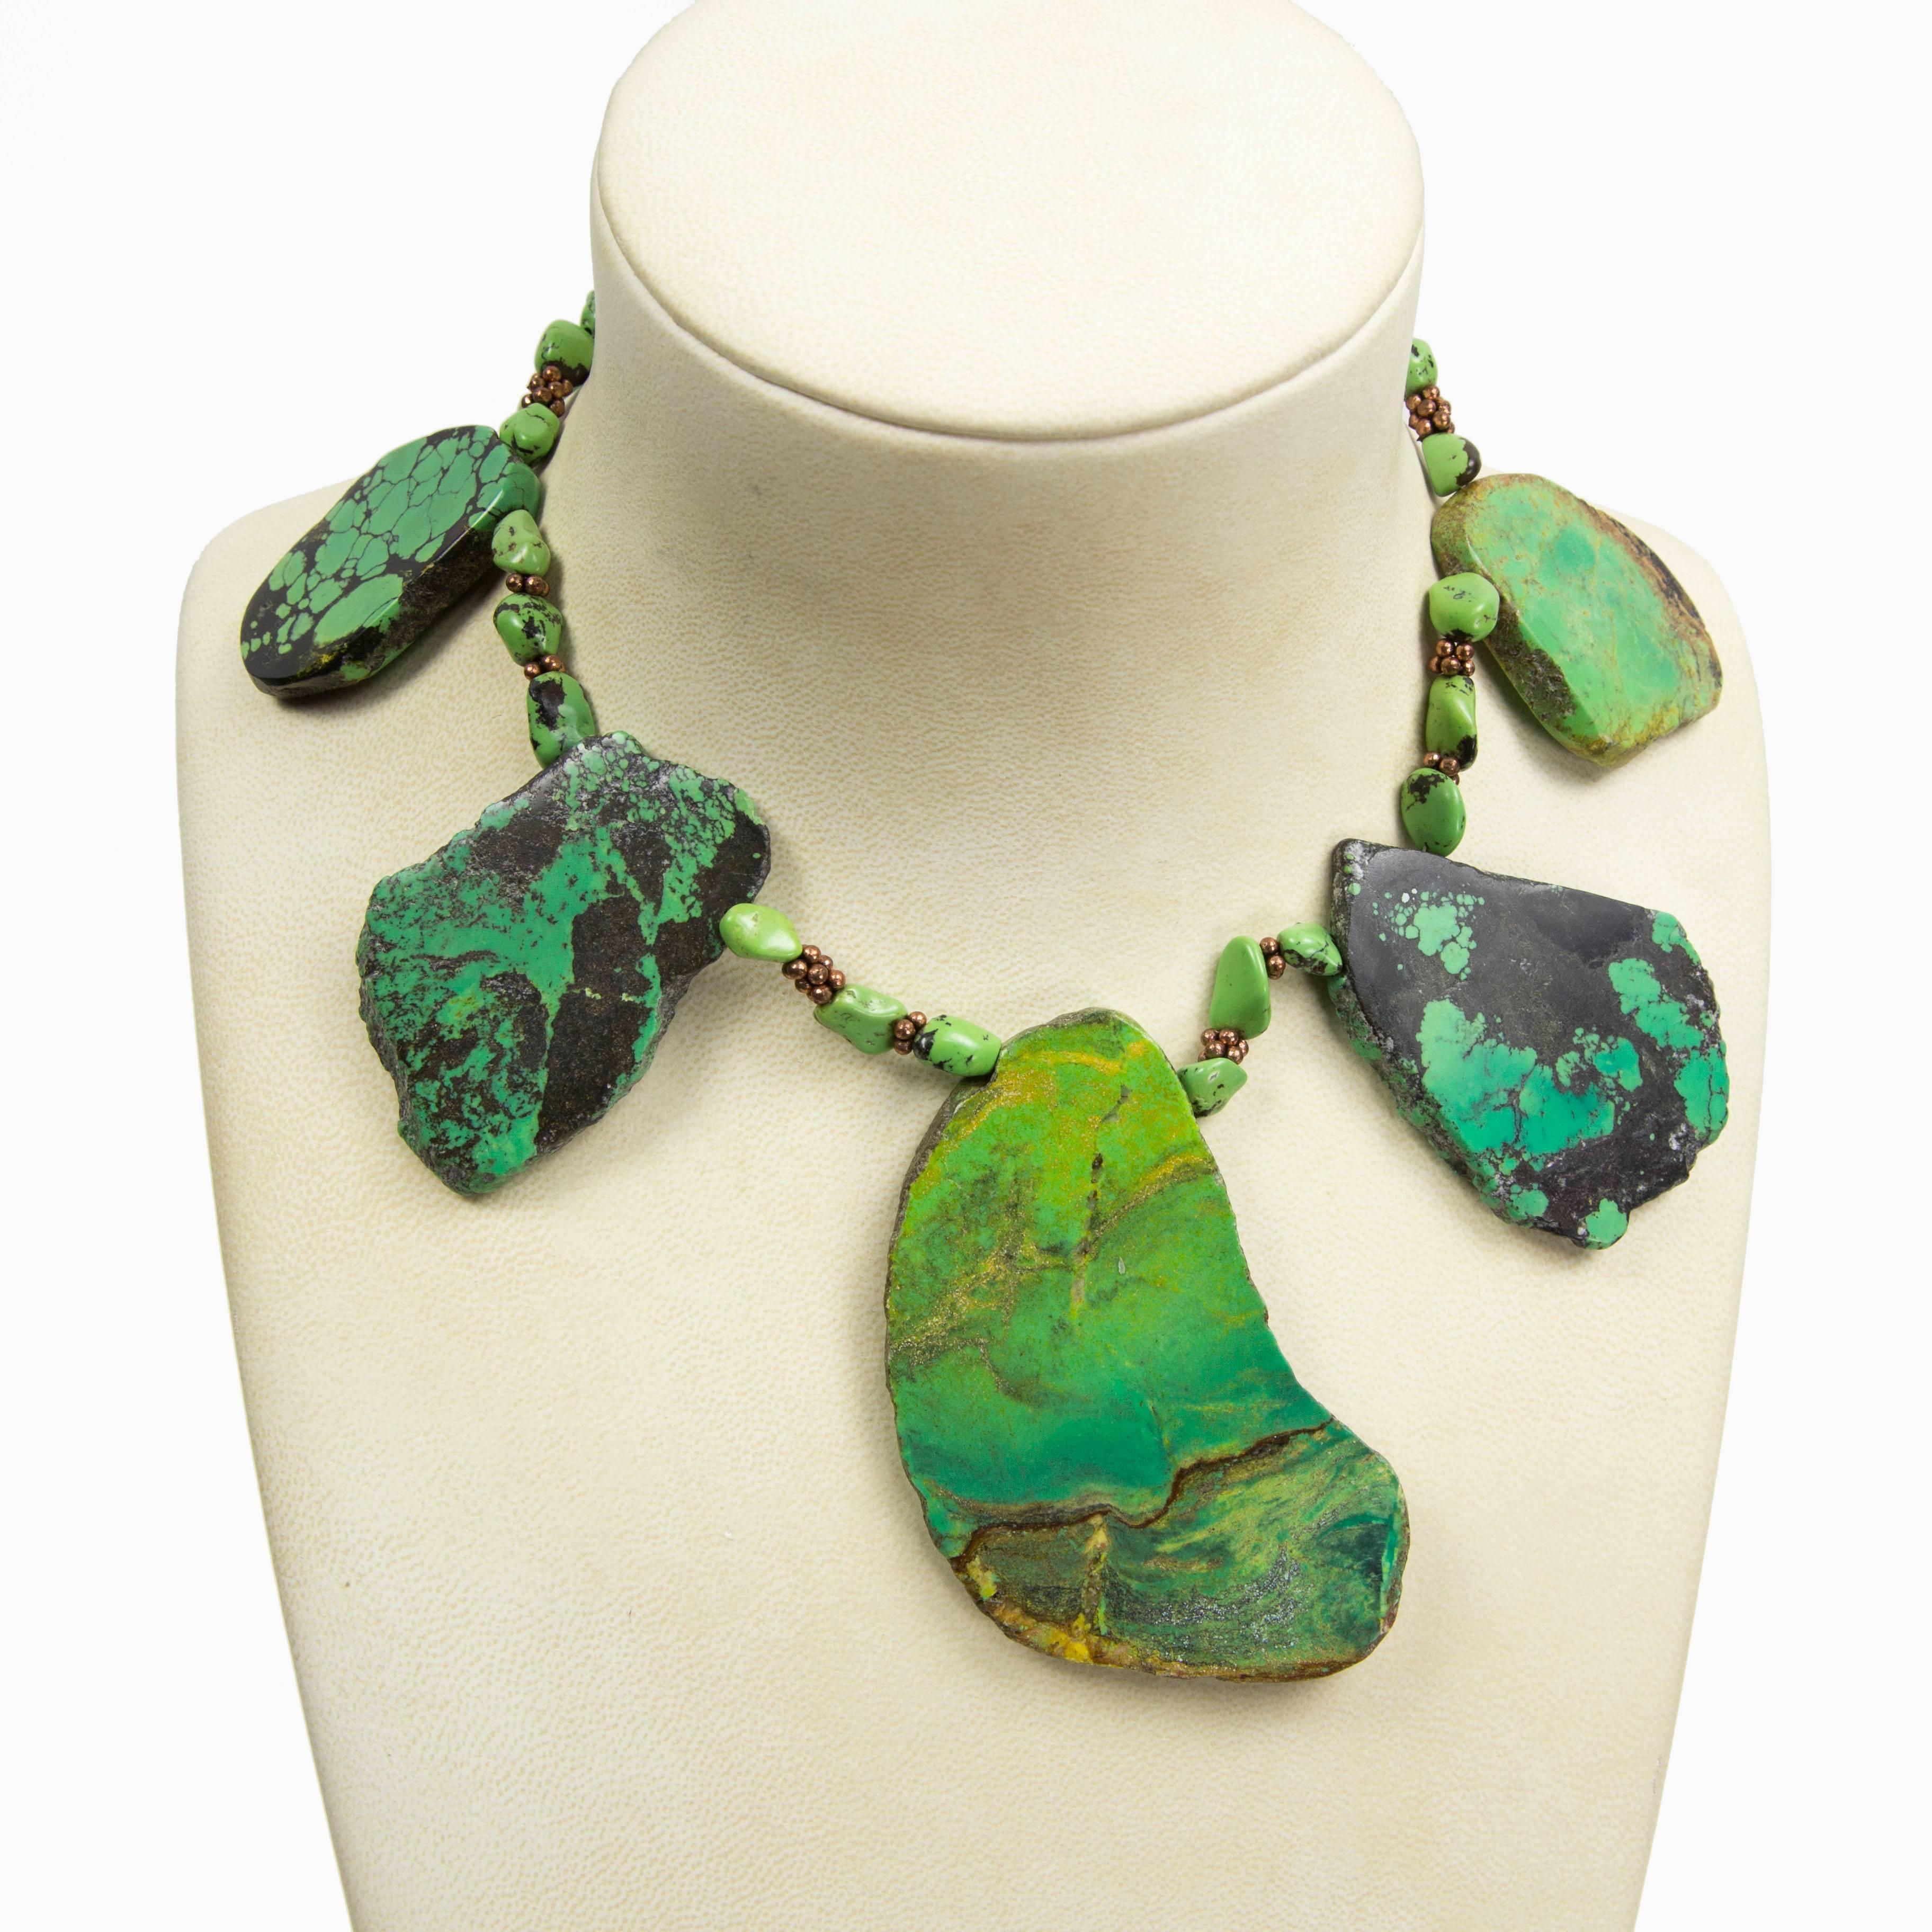 Fabulous necklace featuring five spectacular large High Quality Free-form Turquoise slices showcasing the best display of their individual color variations and shapes, a natural wonder…one more beautiful than the other! inter-spaced with natural